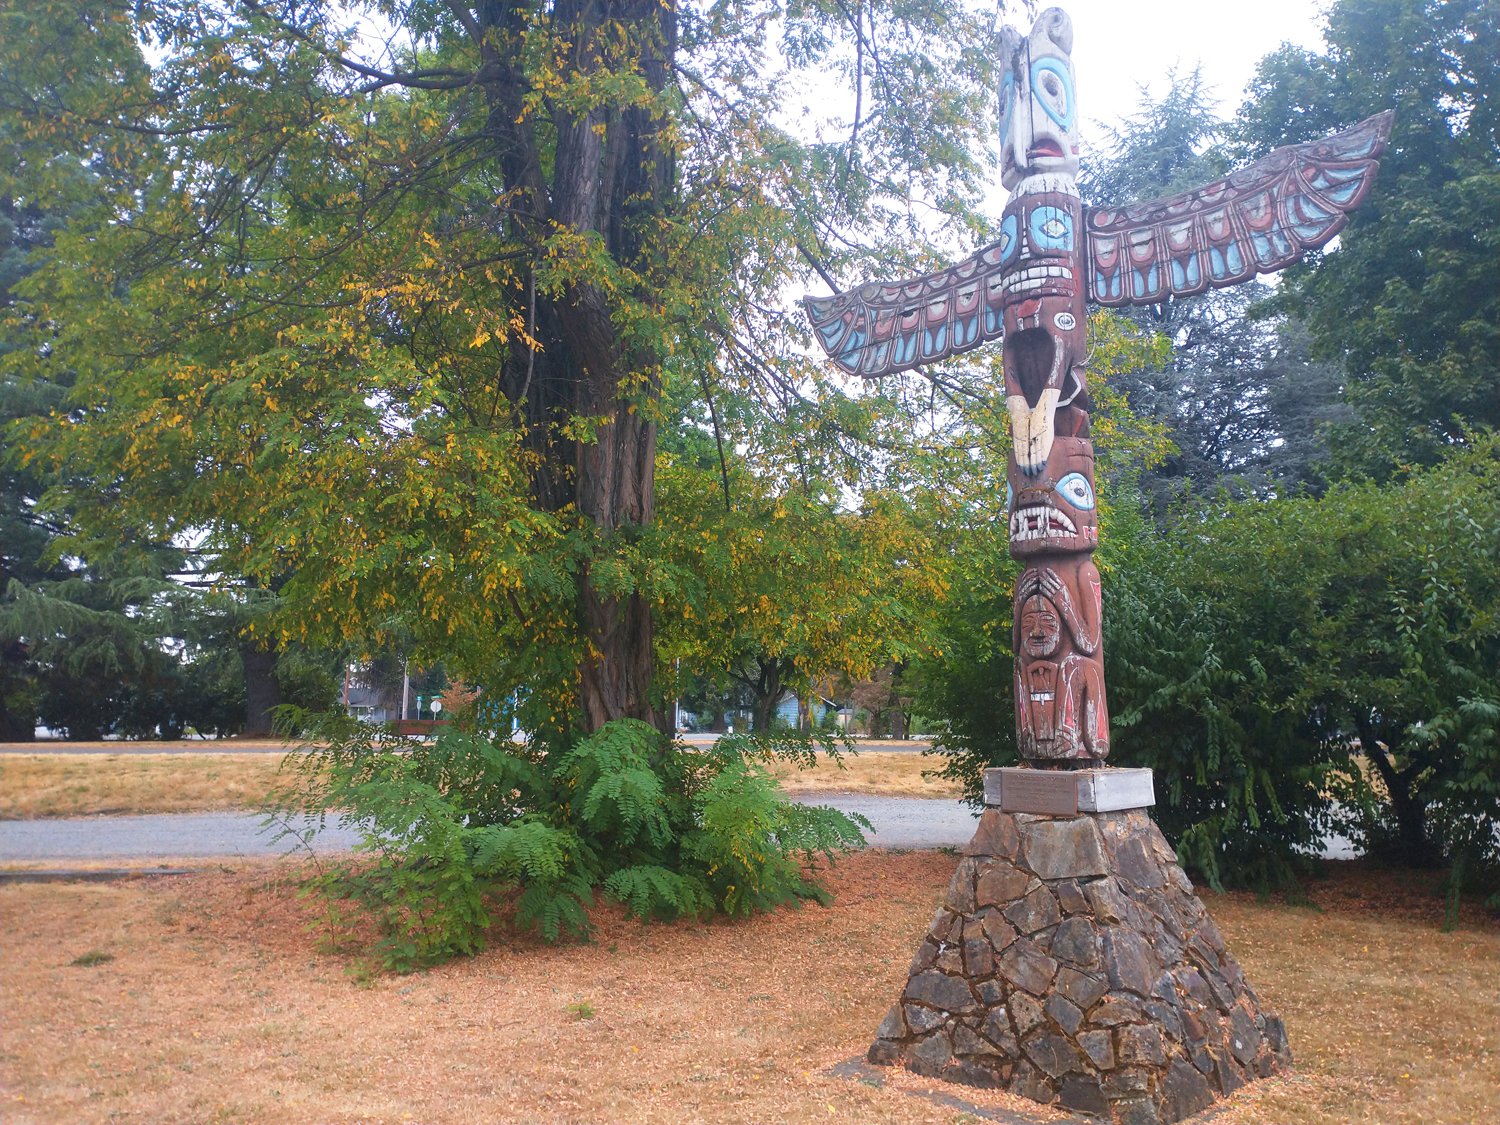 Start of the ride in Buckley. Welcome back to the land of totems.